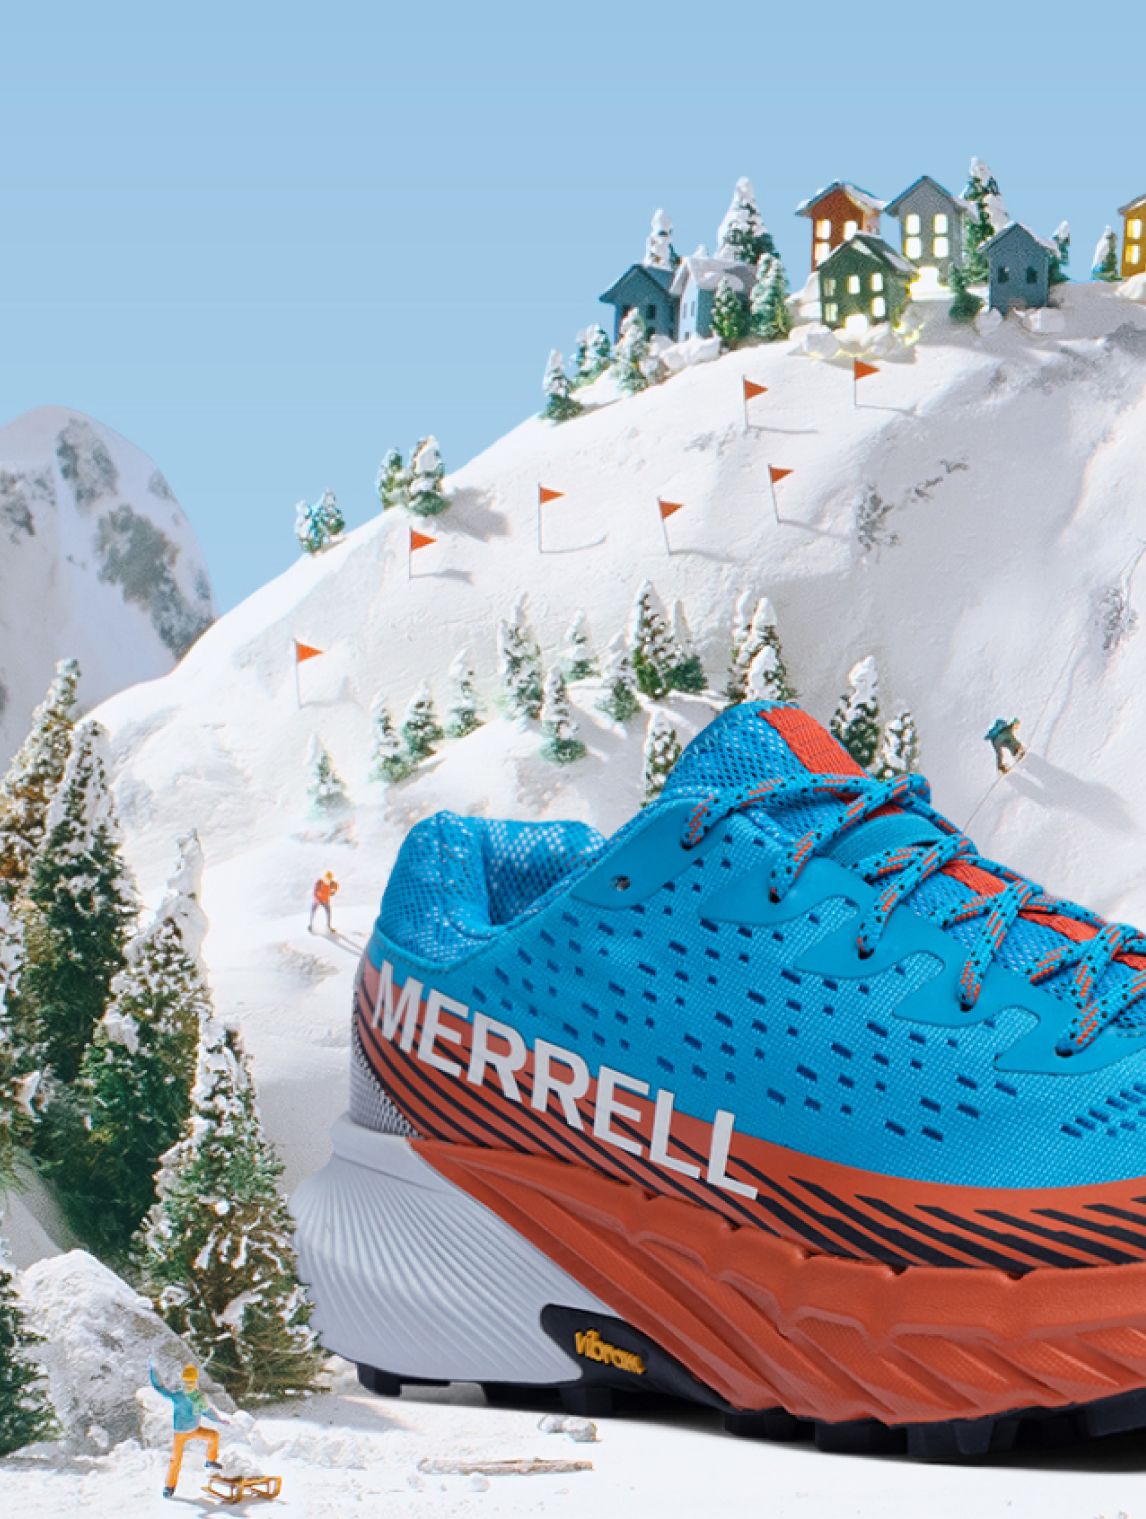 A blue and orange Merrell shoe on a snowy mountain.